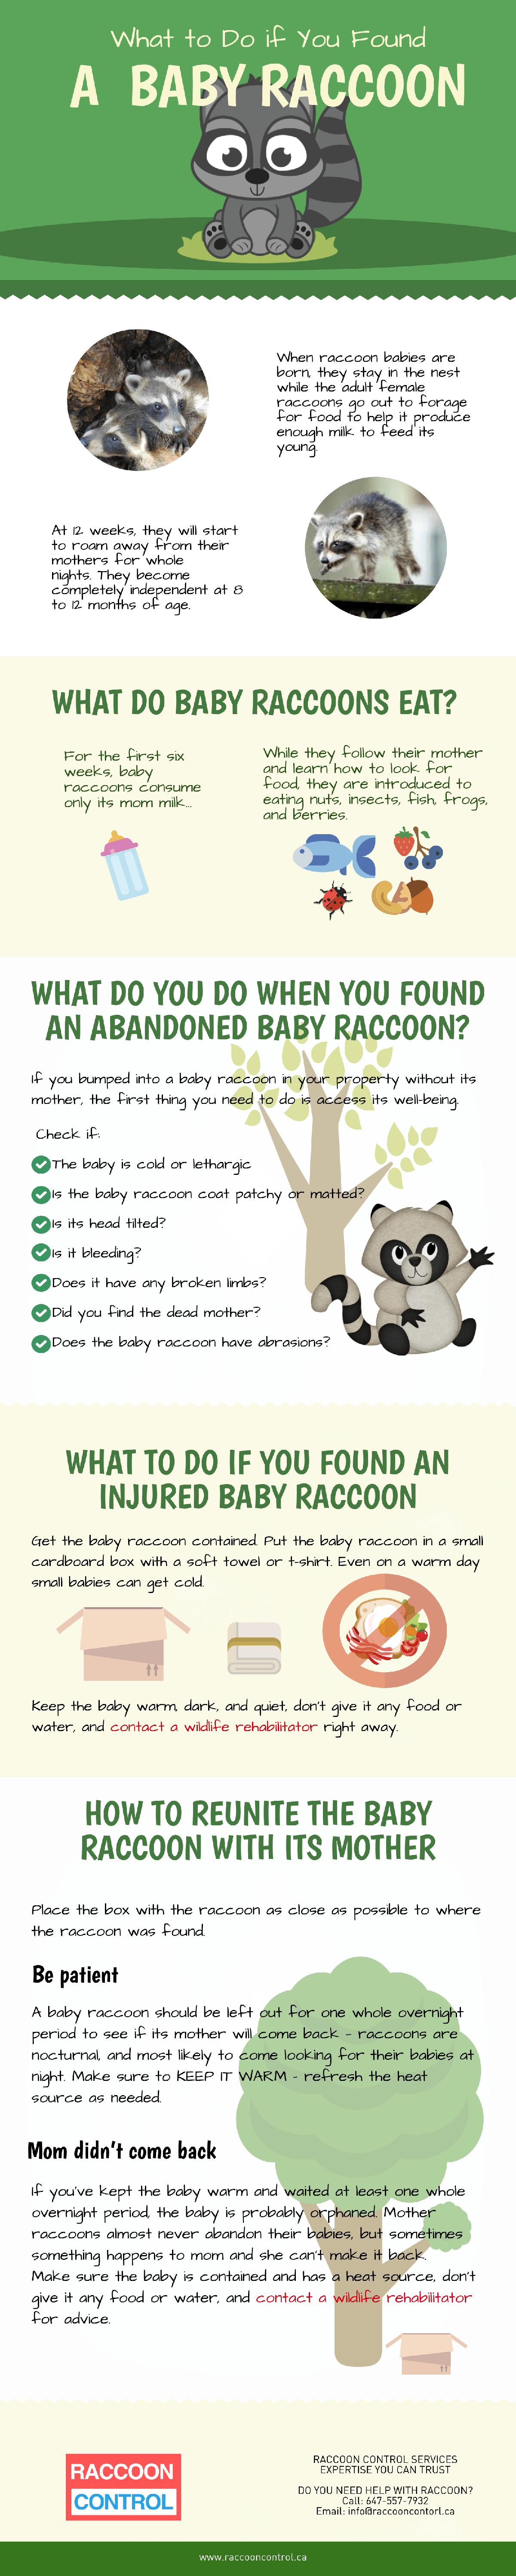 What To Do if You Found a Baby Raccoon